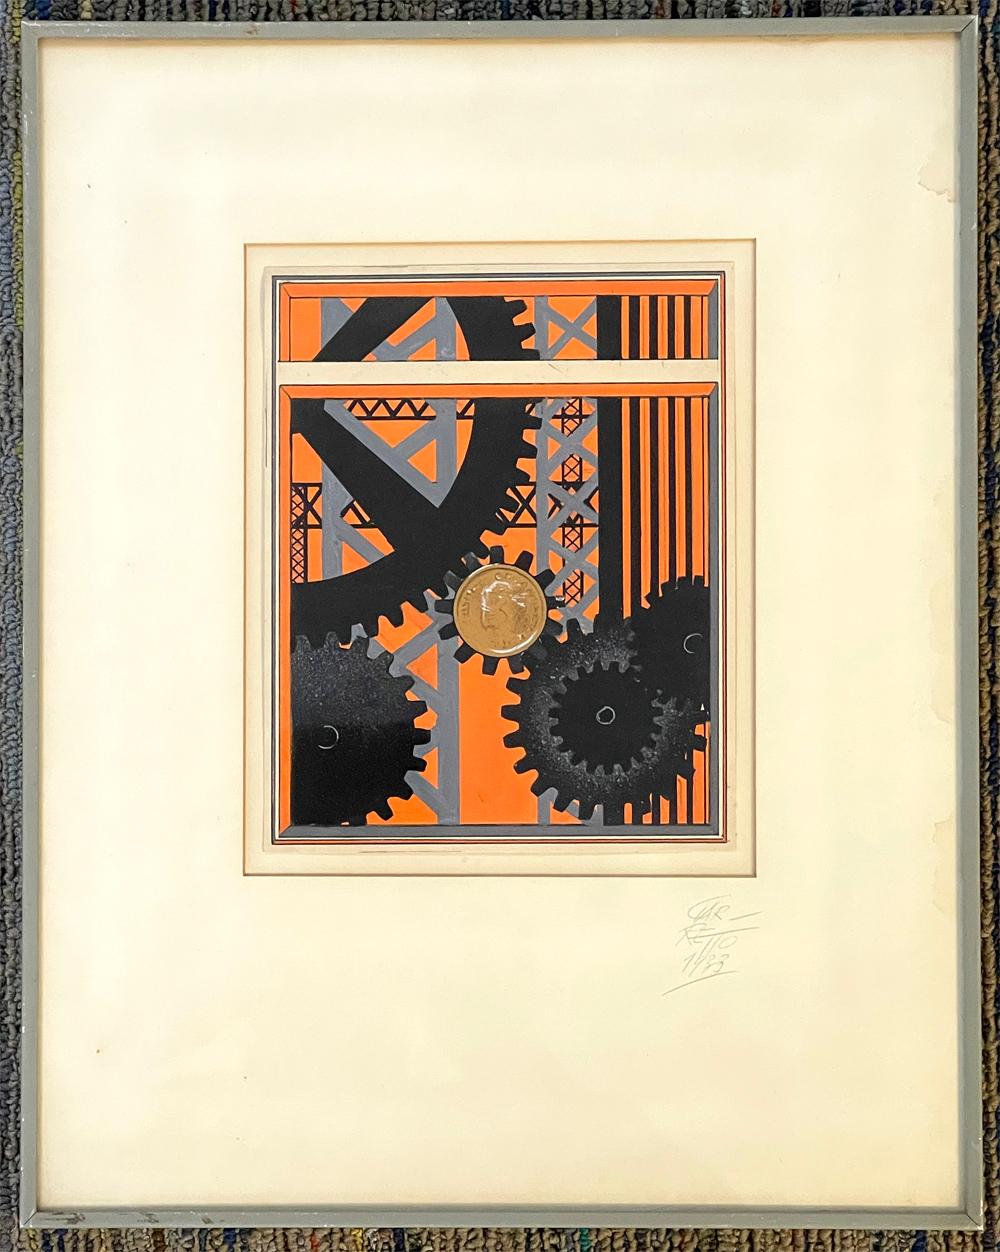 A brilliant example of Art Deco-era painting which celebrated American manufacturing with stylized images of gears and Industrial architecture, this gouache painting by Paolo Garretto was executed in 1933, no doubt as an unpublished maquette for the